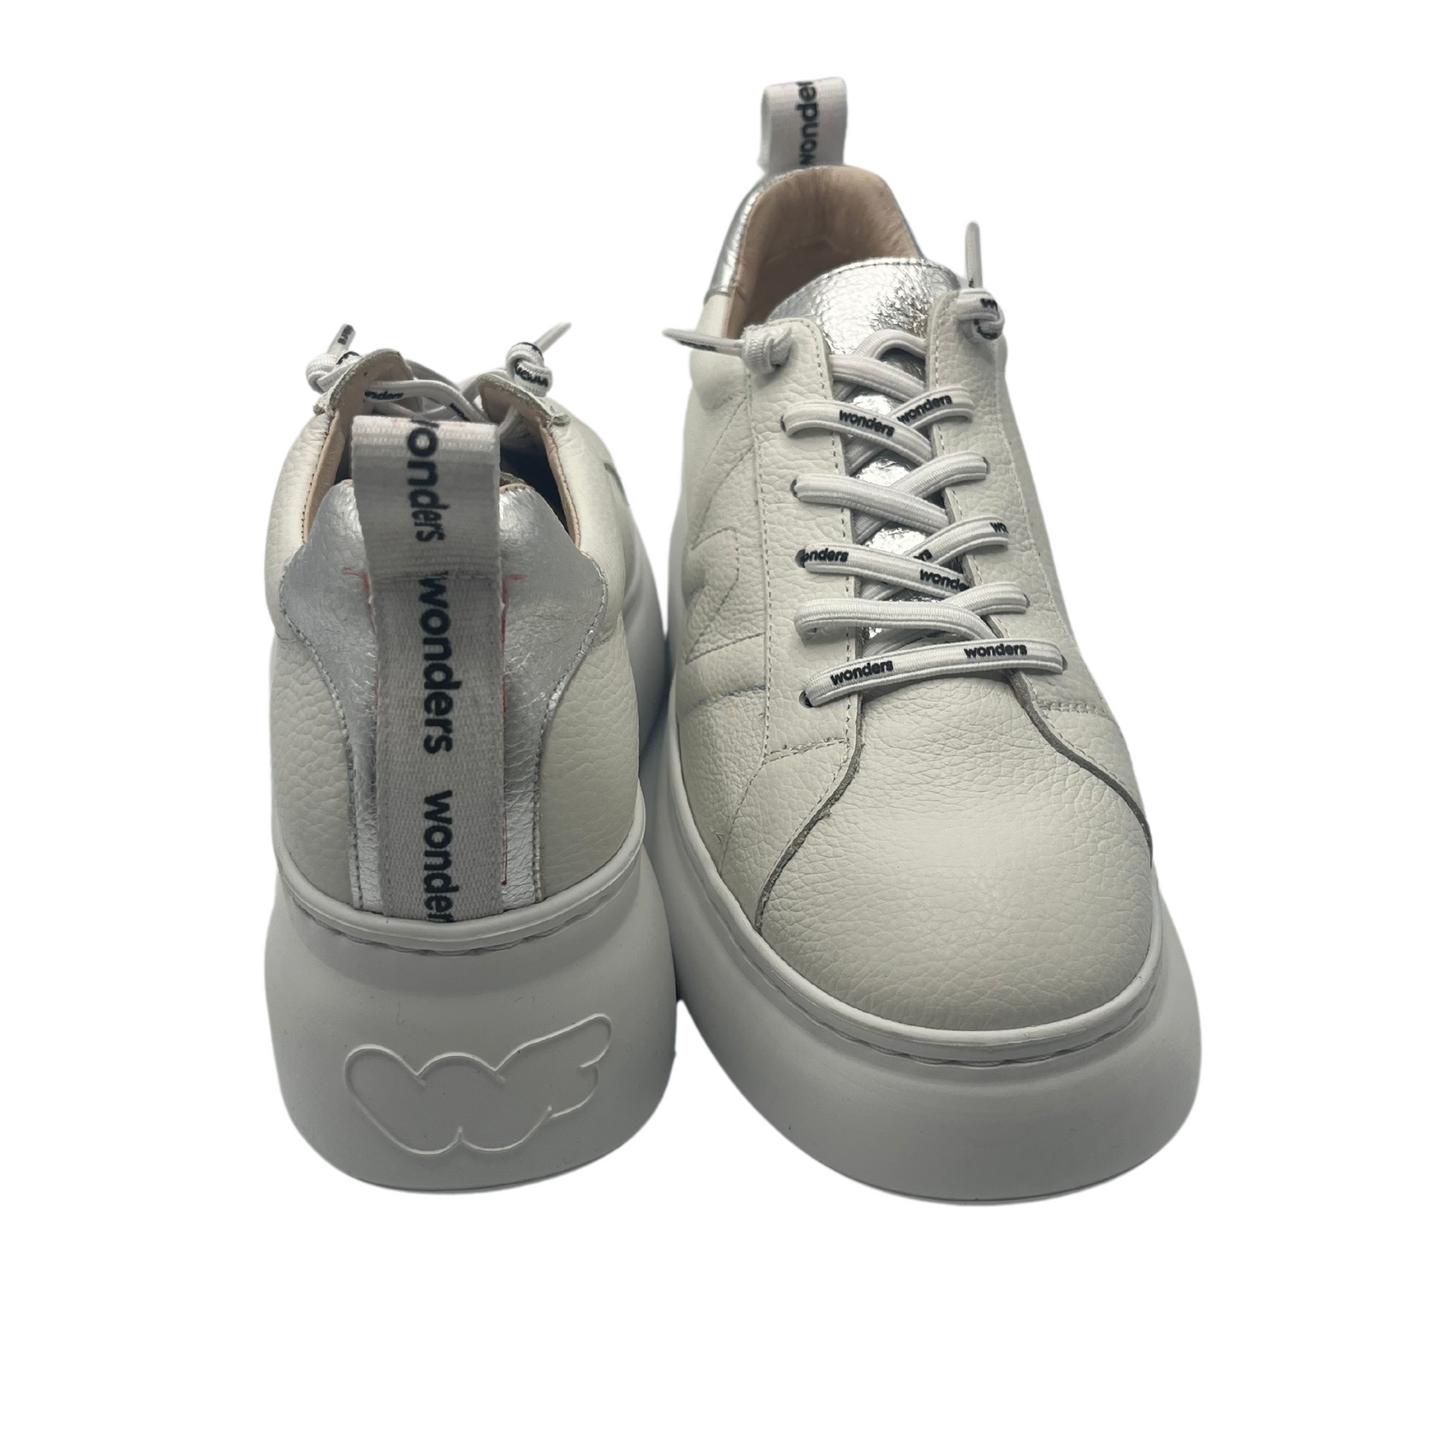 View of a pair of leather sneakers with heel pull tab and white platform sole